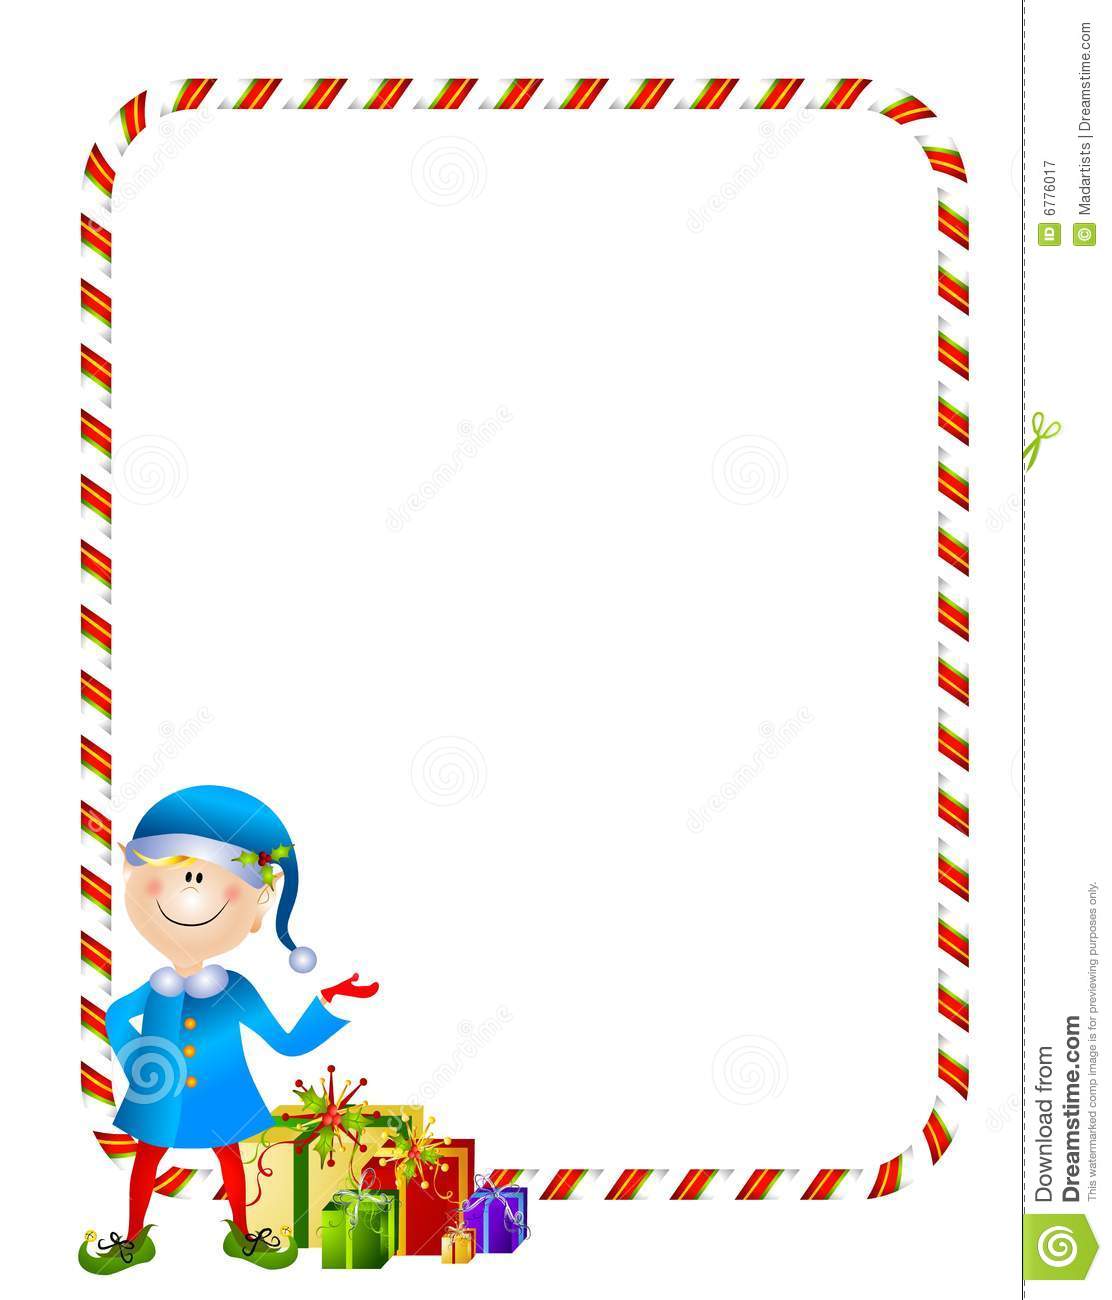 Featuring A Little Christmas Elf With Gifts And Candy Cane Border